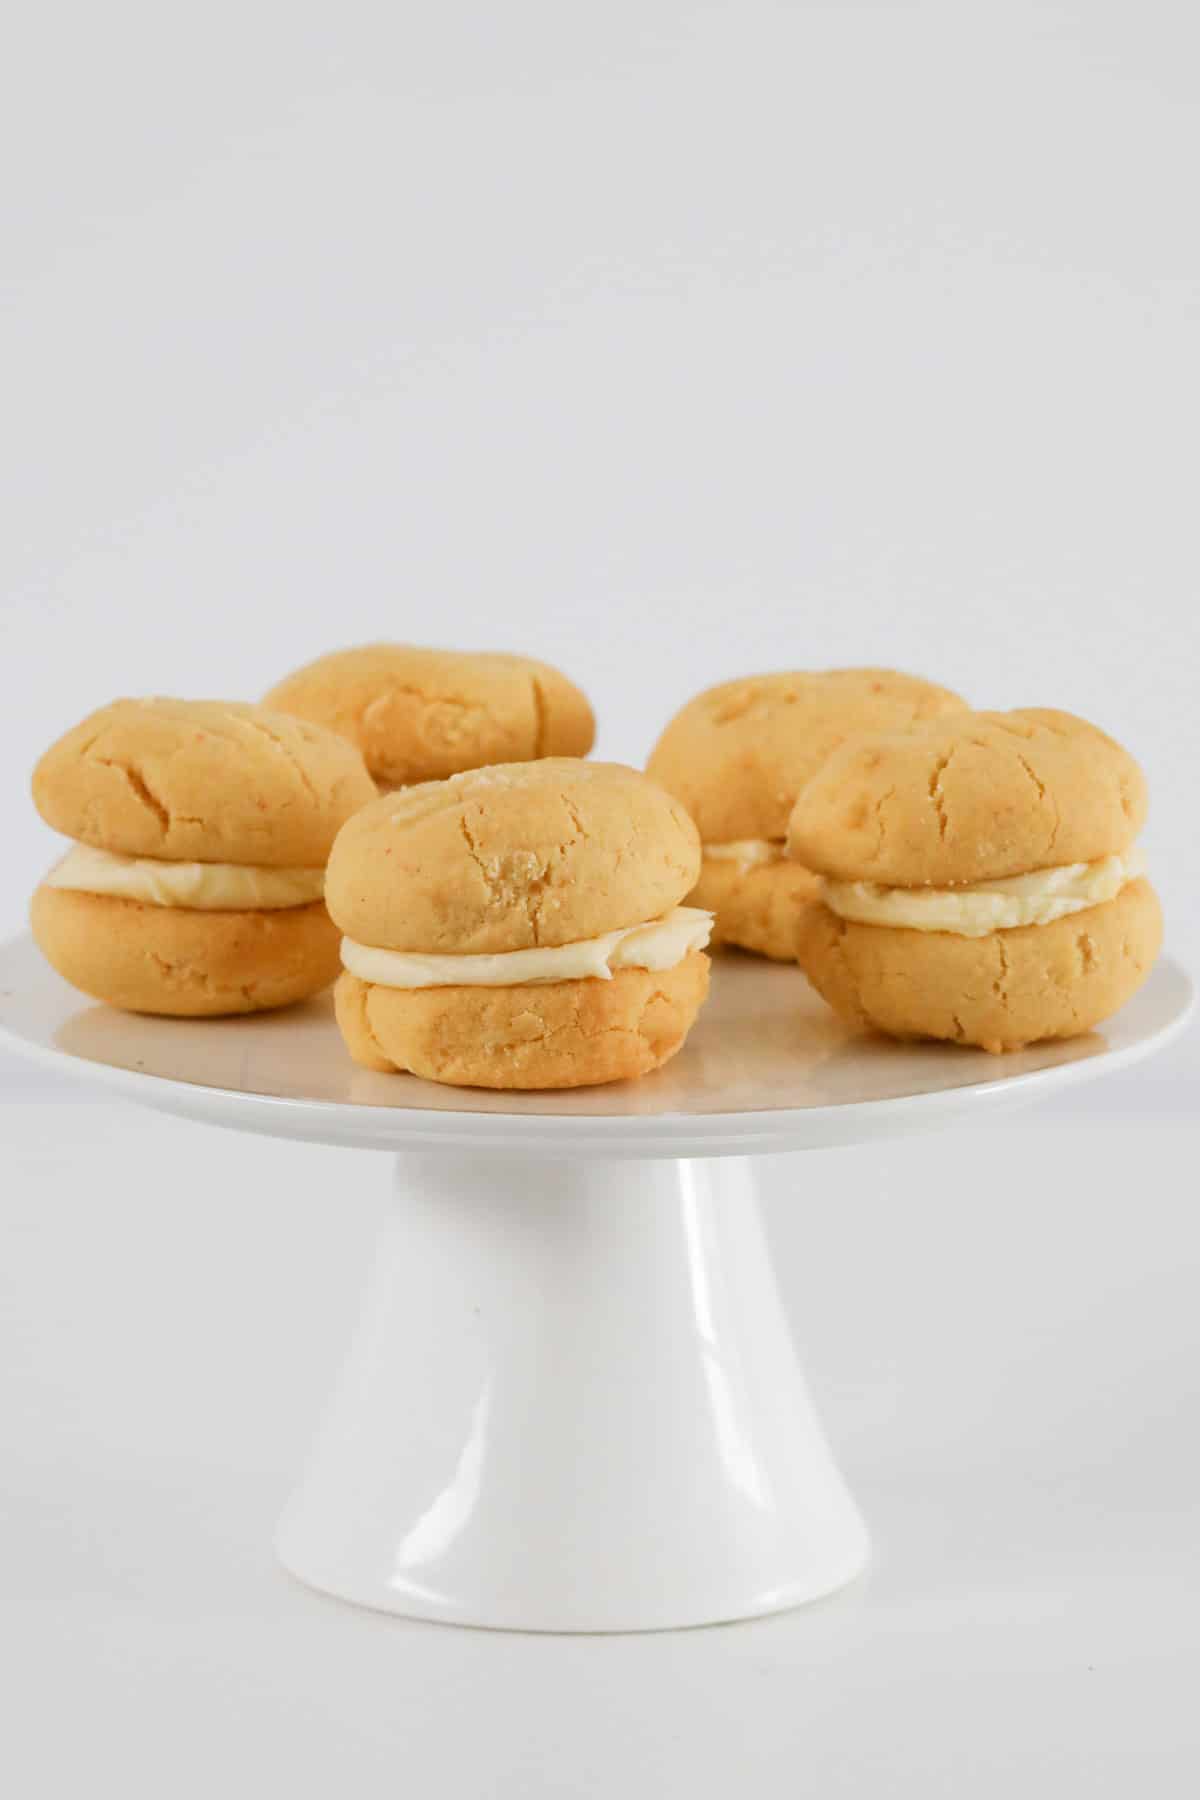 A cake stand topped with yoyo biscuits.